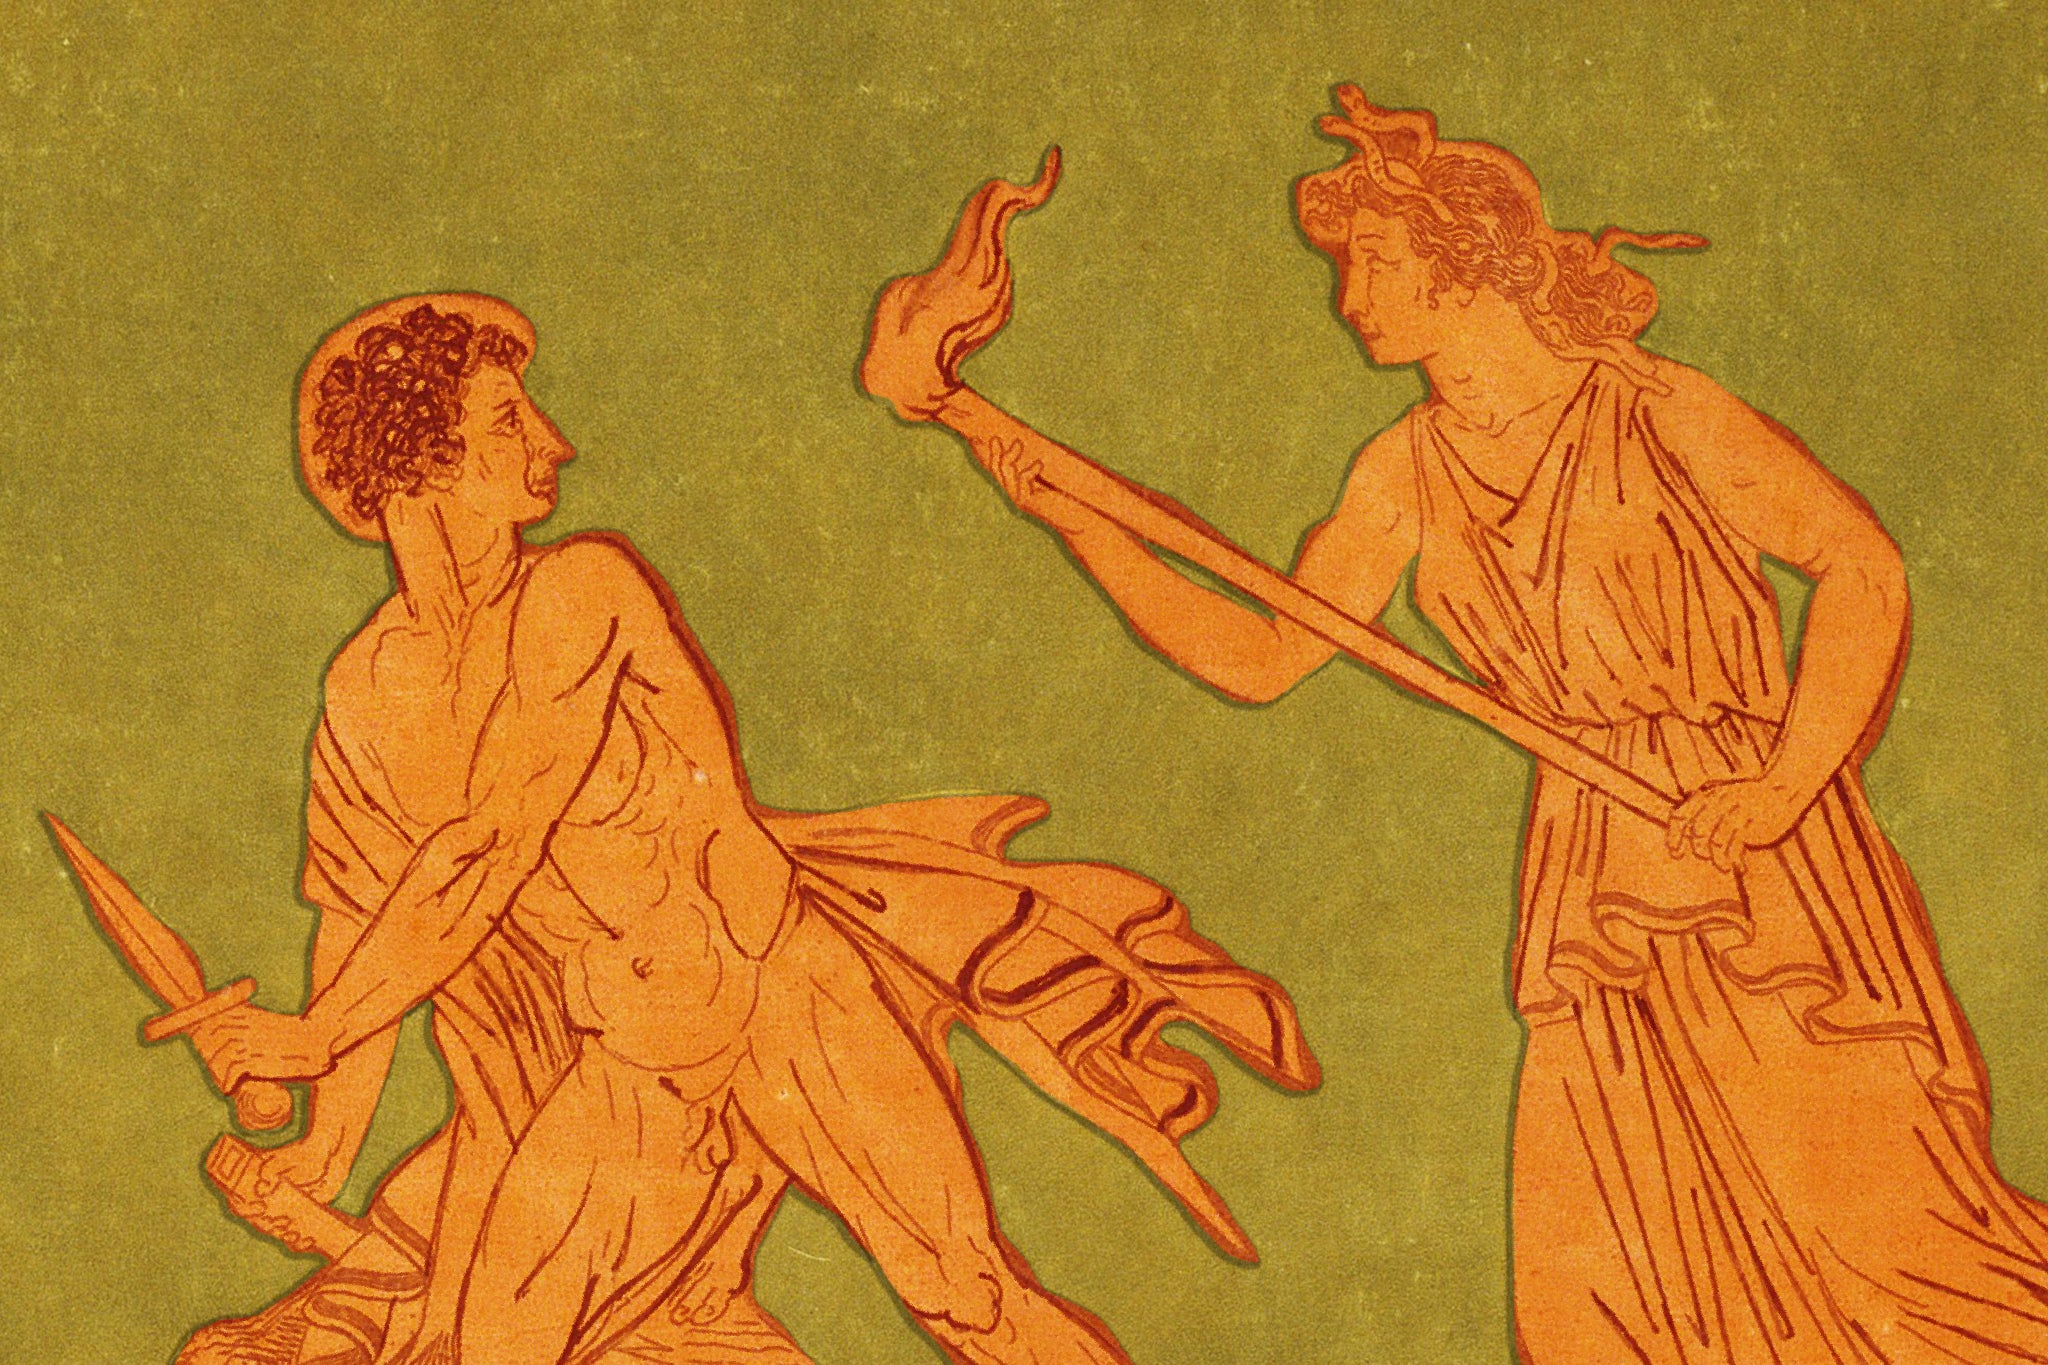 Hell hath no fury: Orestes is fought by one of the Furies of Greek mythology, in a relief found on an ancient Greek vase